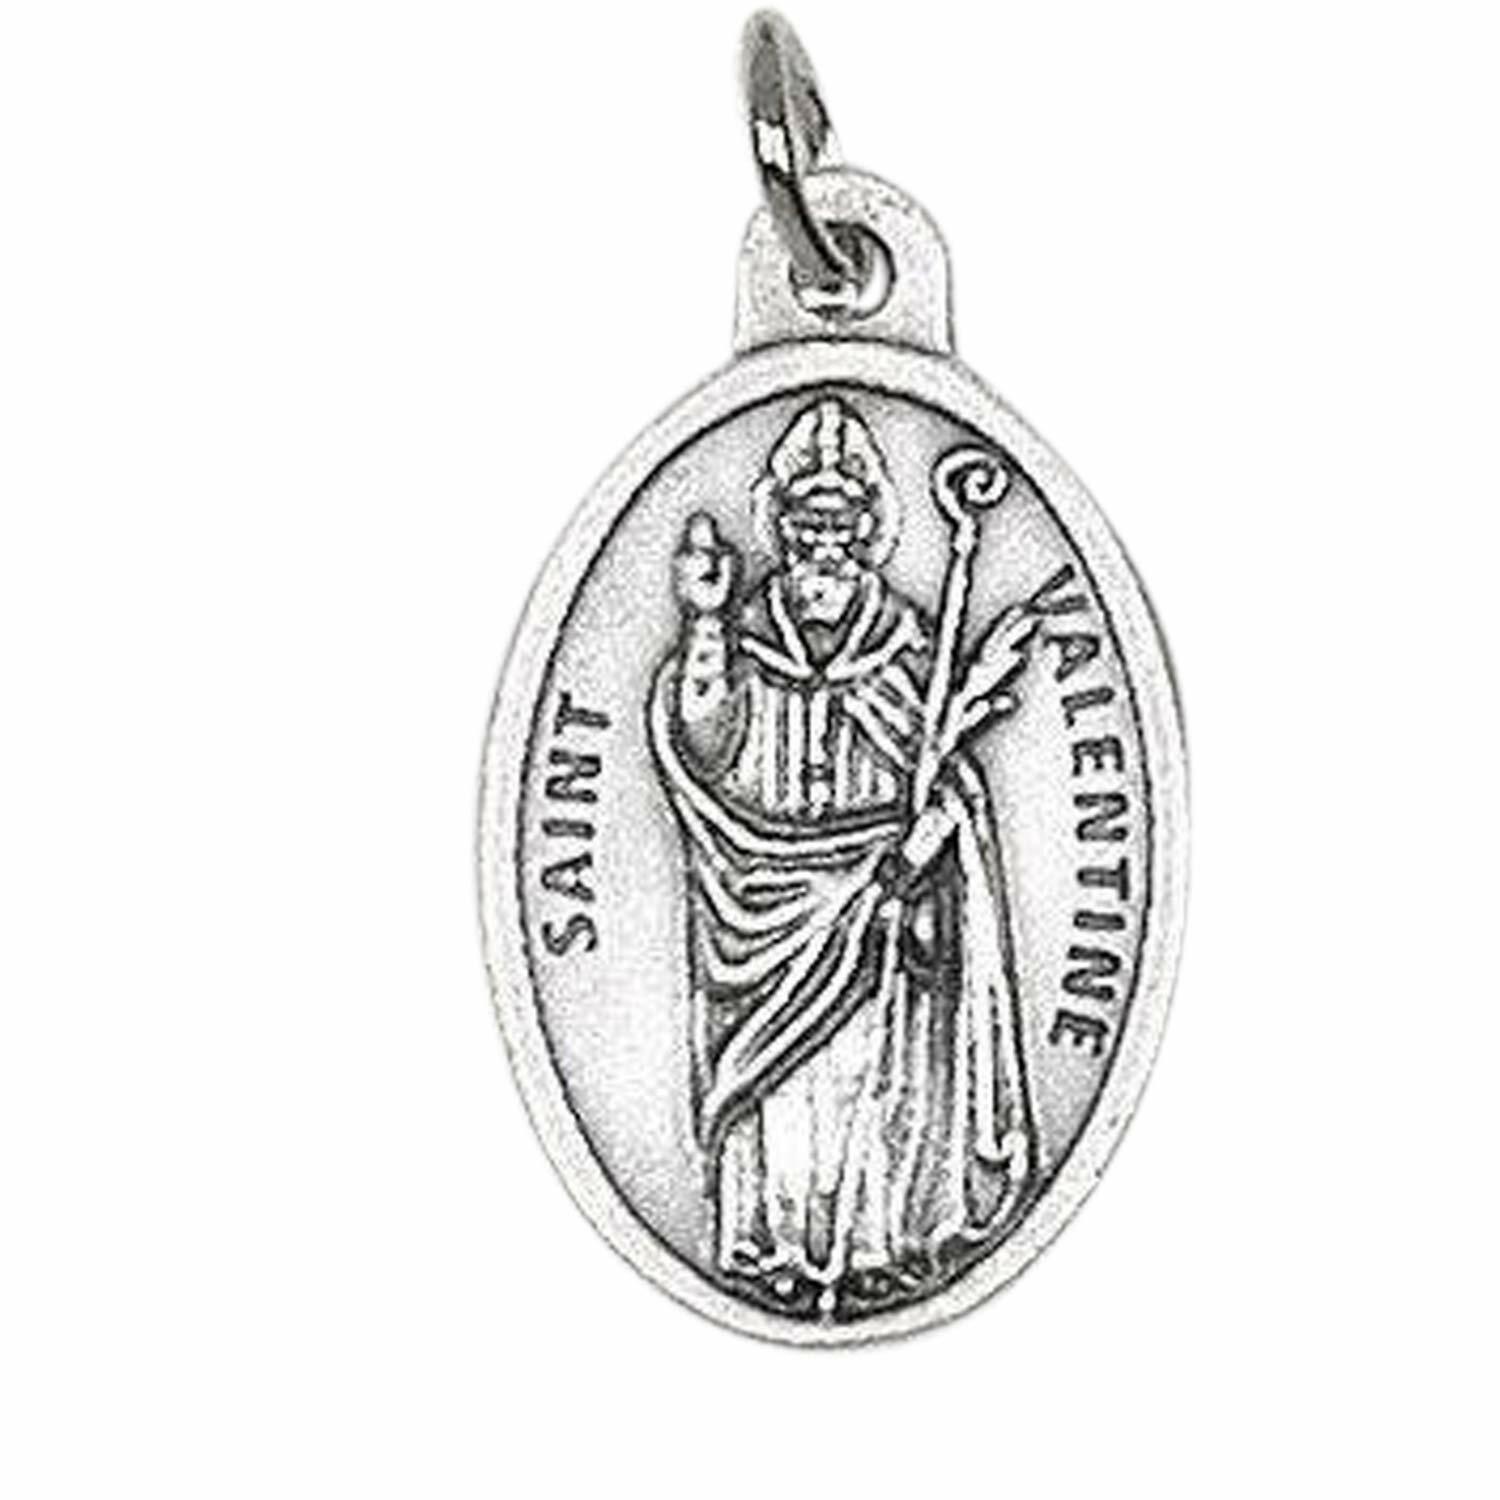 Saint Valentine of Rome Patron of Love and Marriage Medal Silver Oxidized